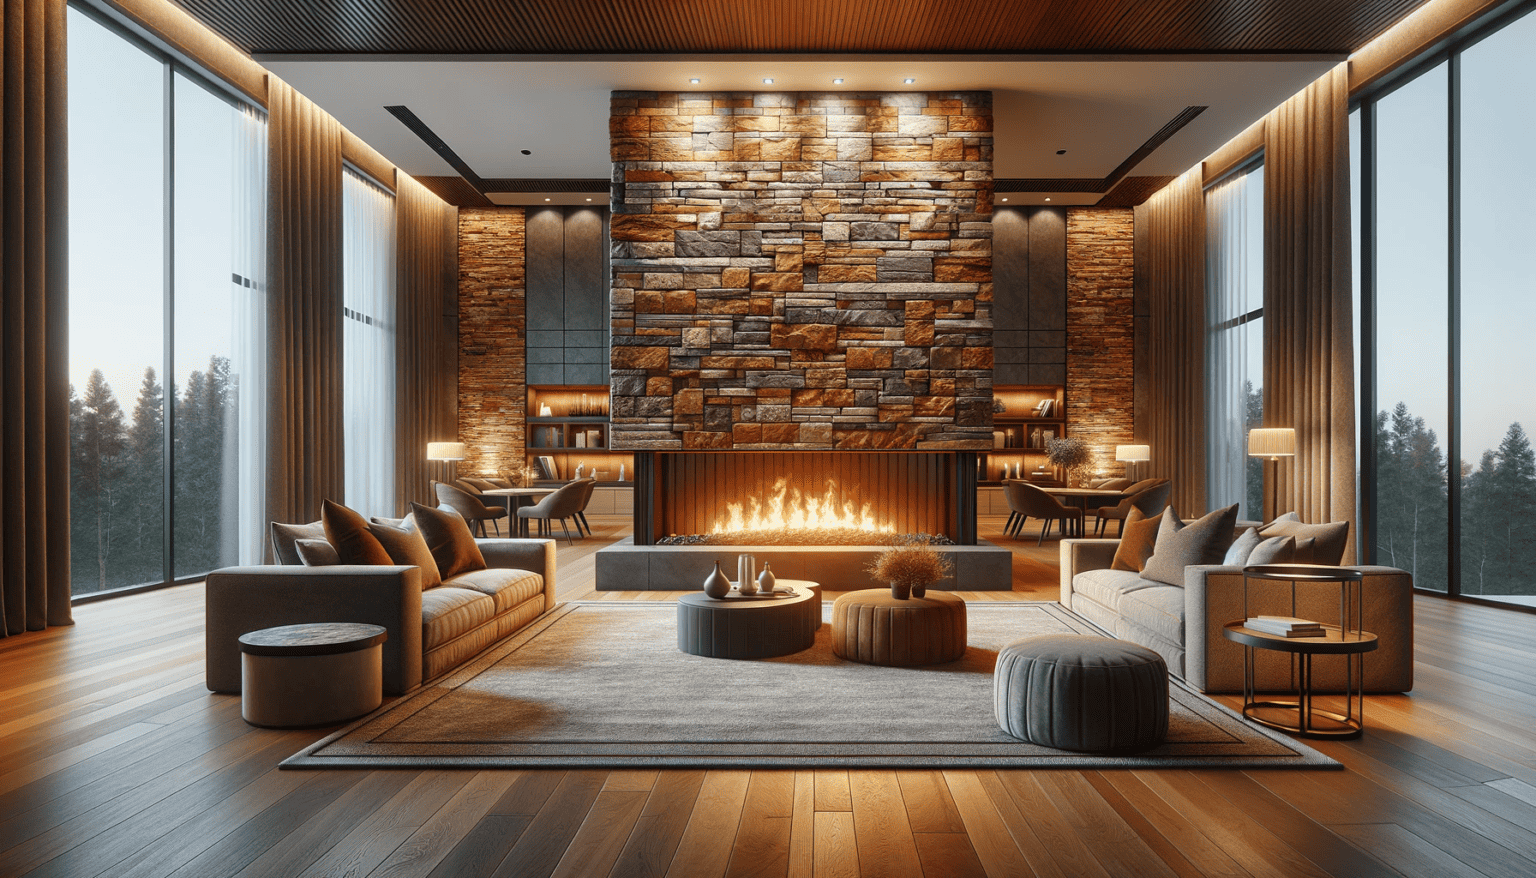 Natural Stone Wall Panels sitting area around fireplace with flooring featuring Reclaimed Wood planks in a smooth finish.